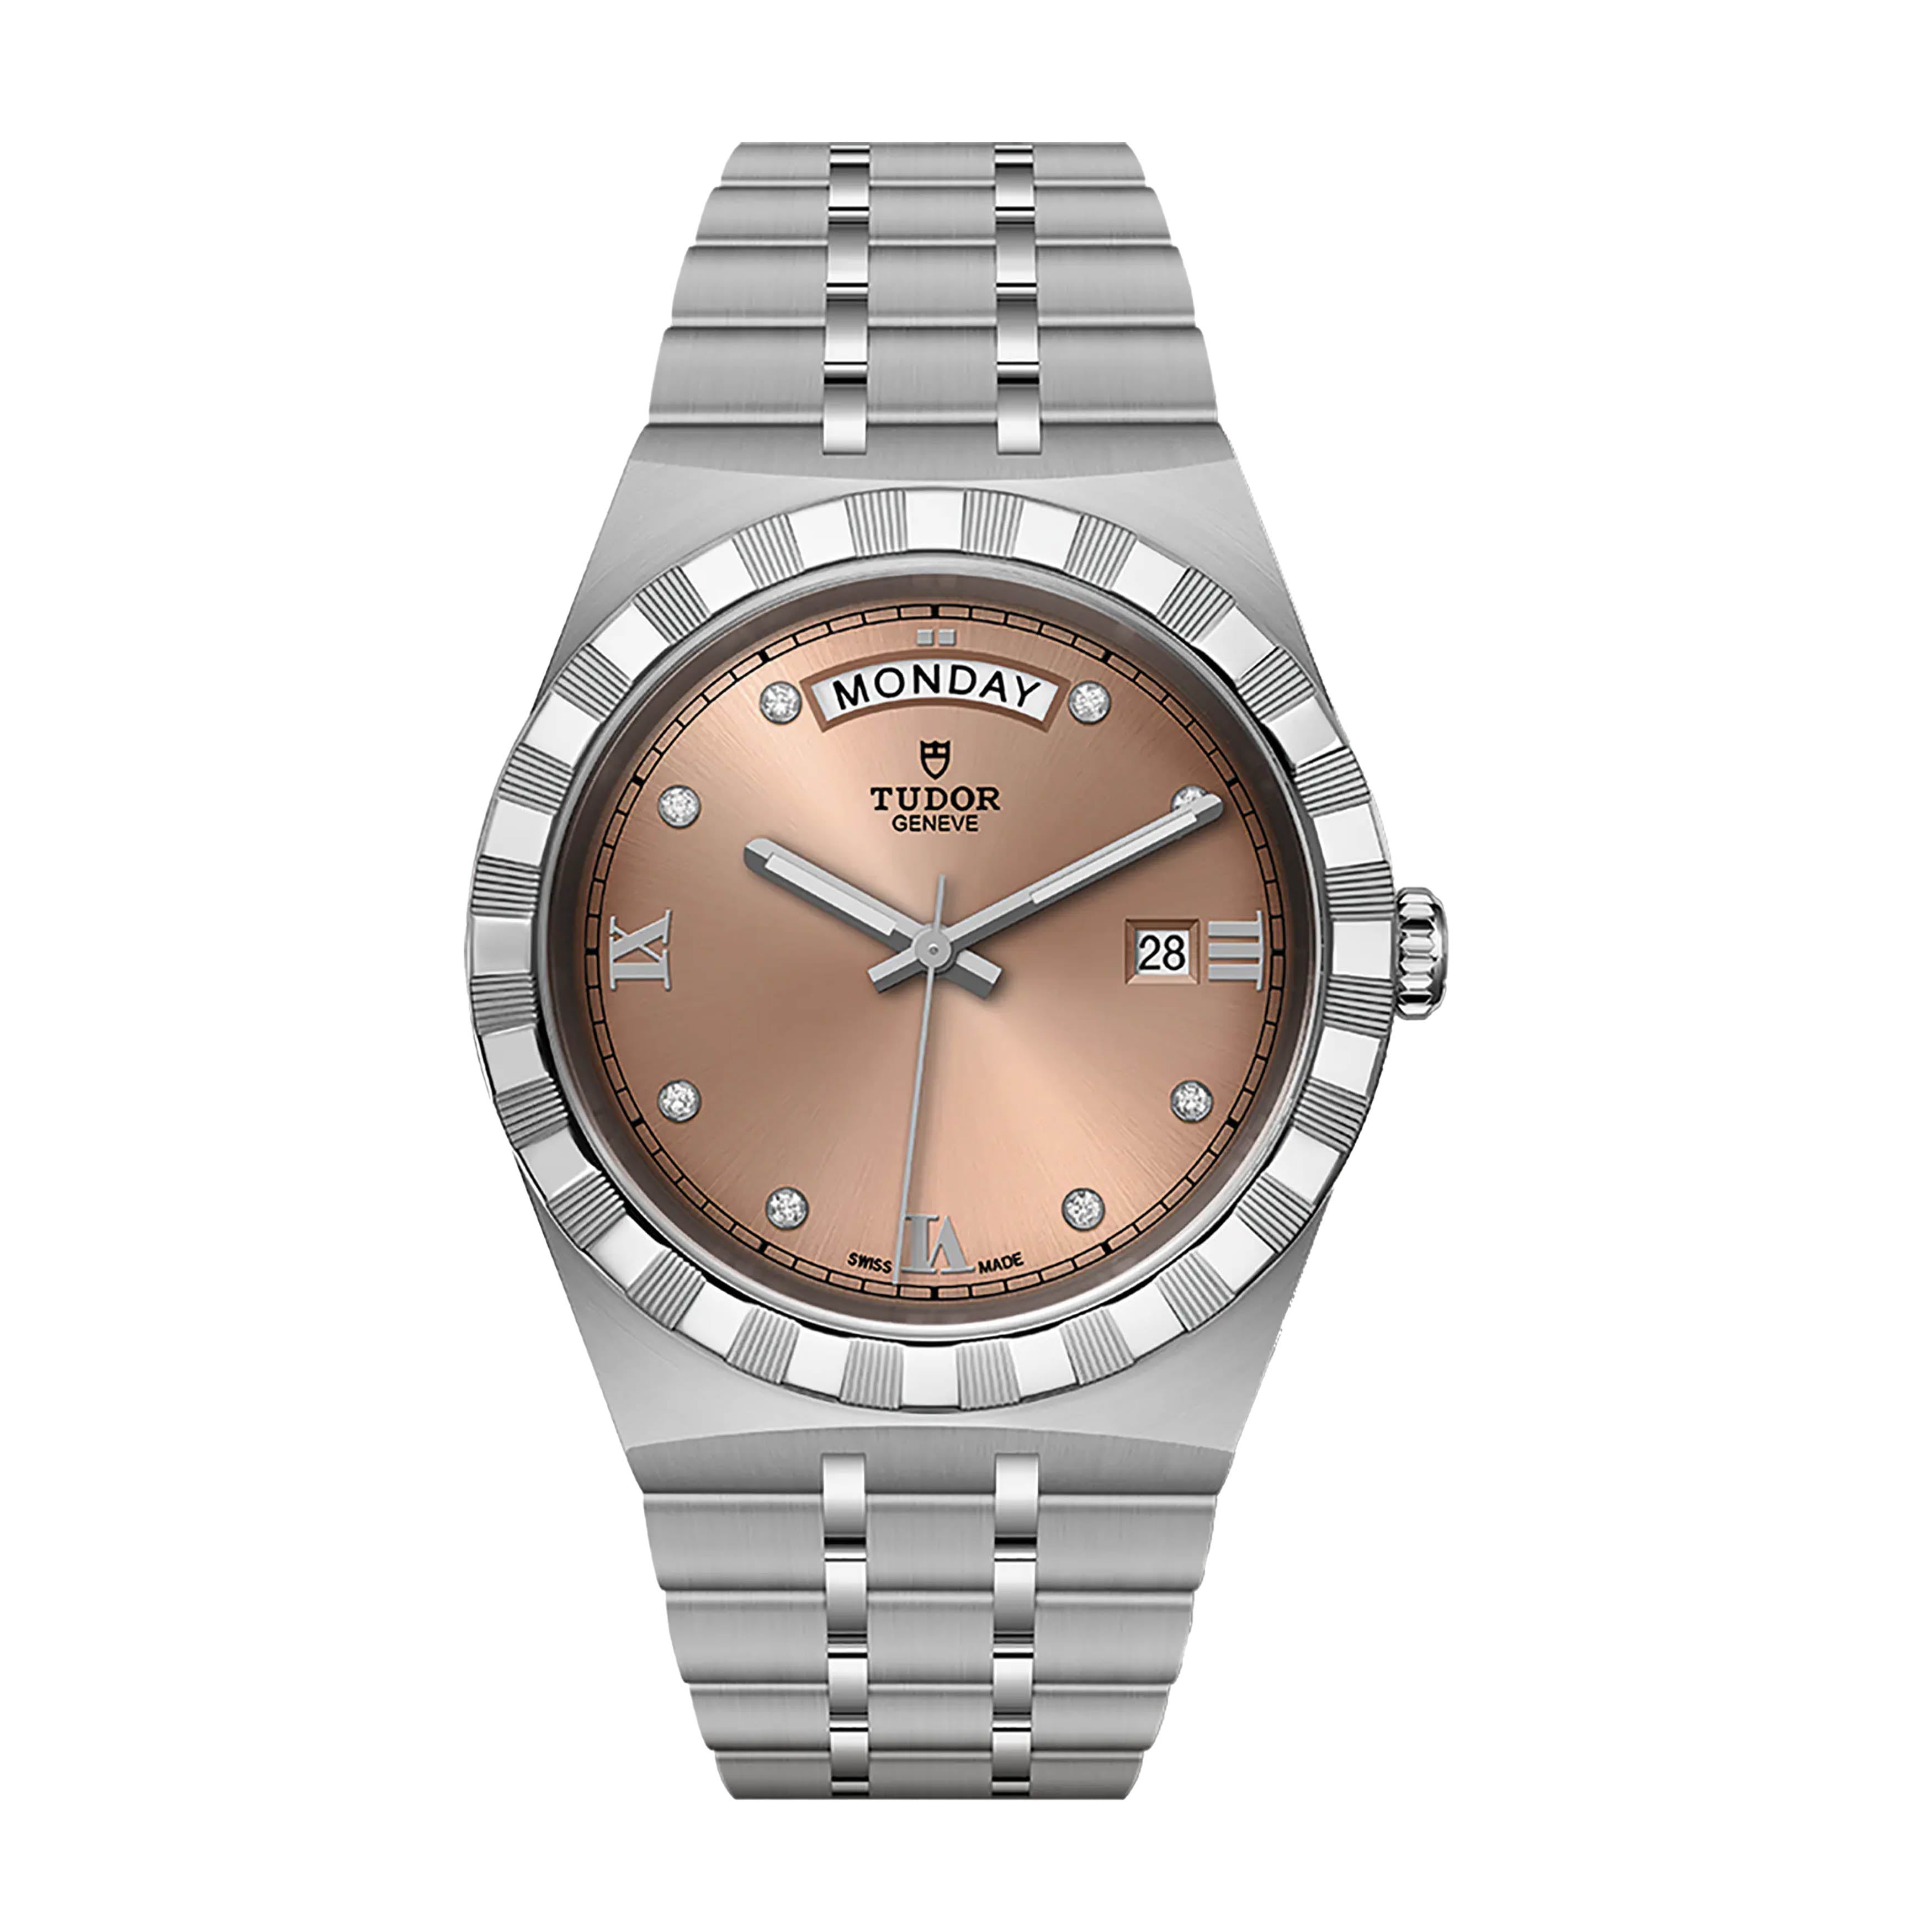 Tudor Royal Day/Date Watch, 41mm Salmon DialM28600-0011